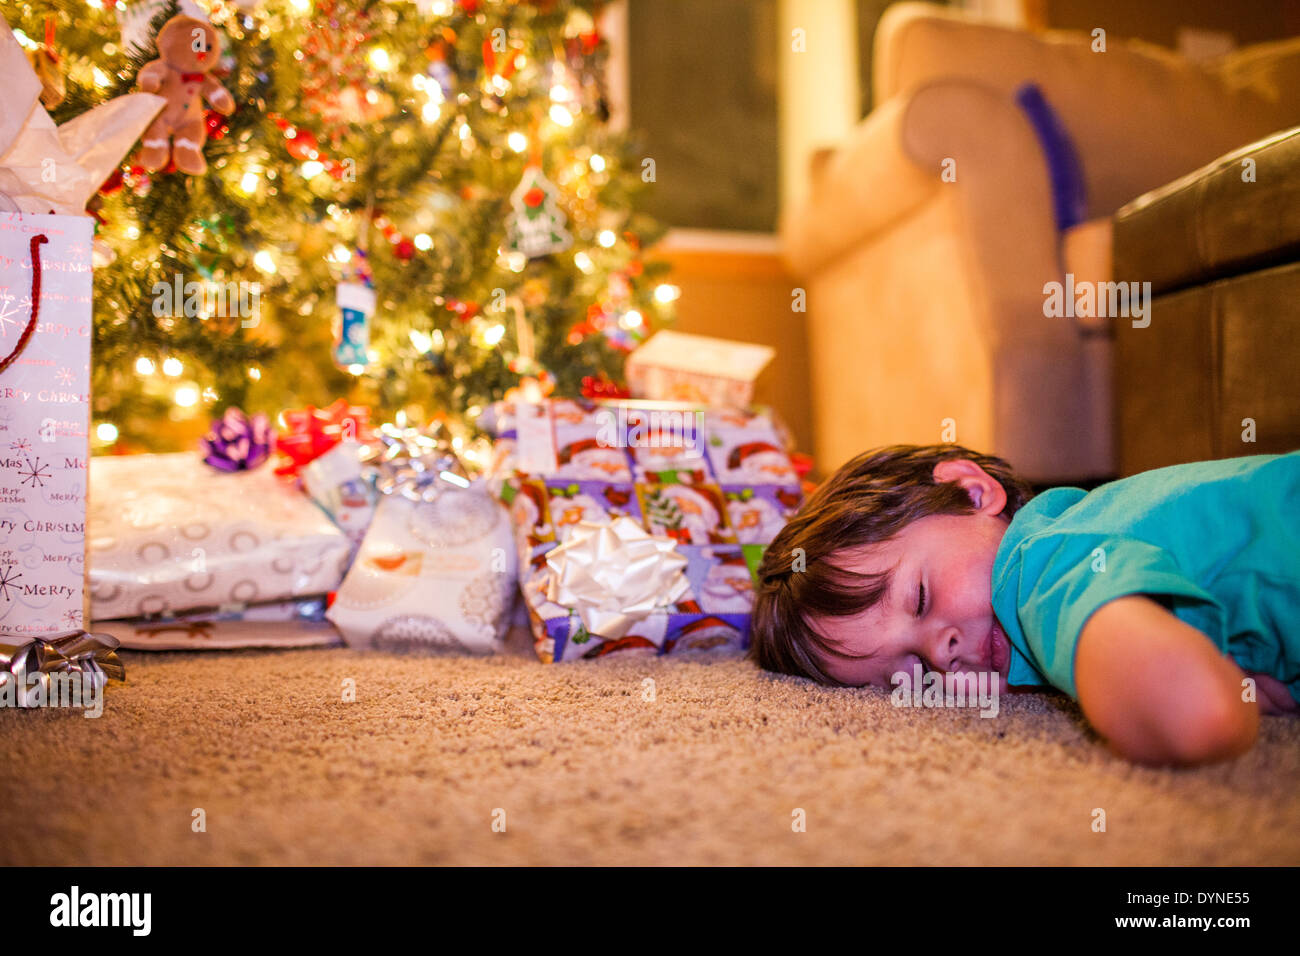 Caucasian boy sleeping by Christmas gifts Stock Photo